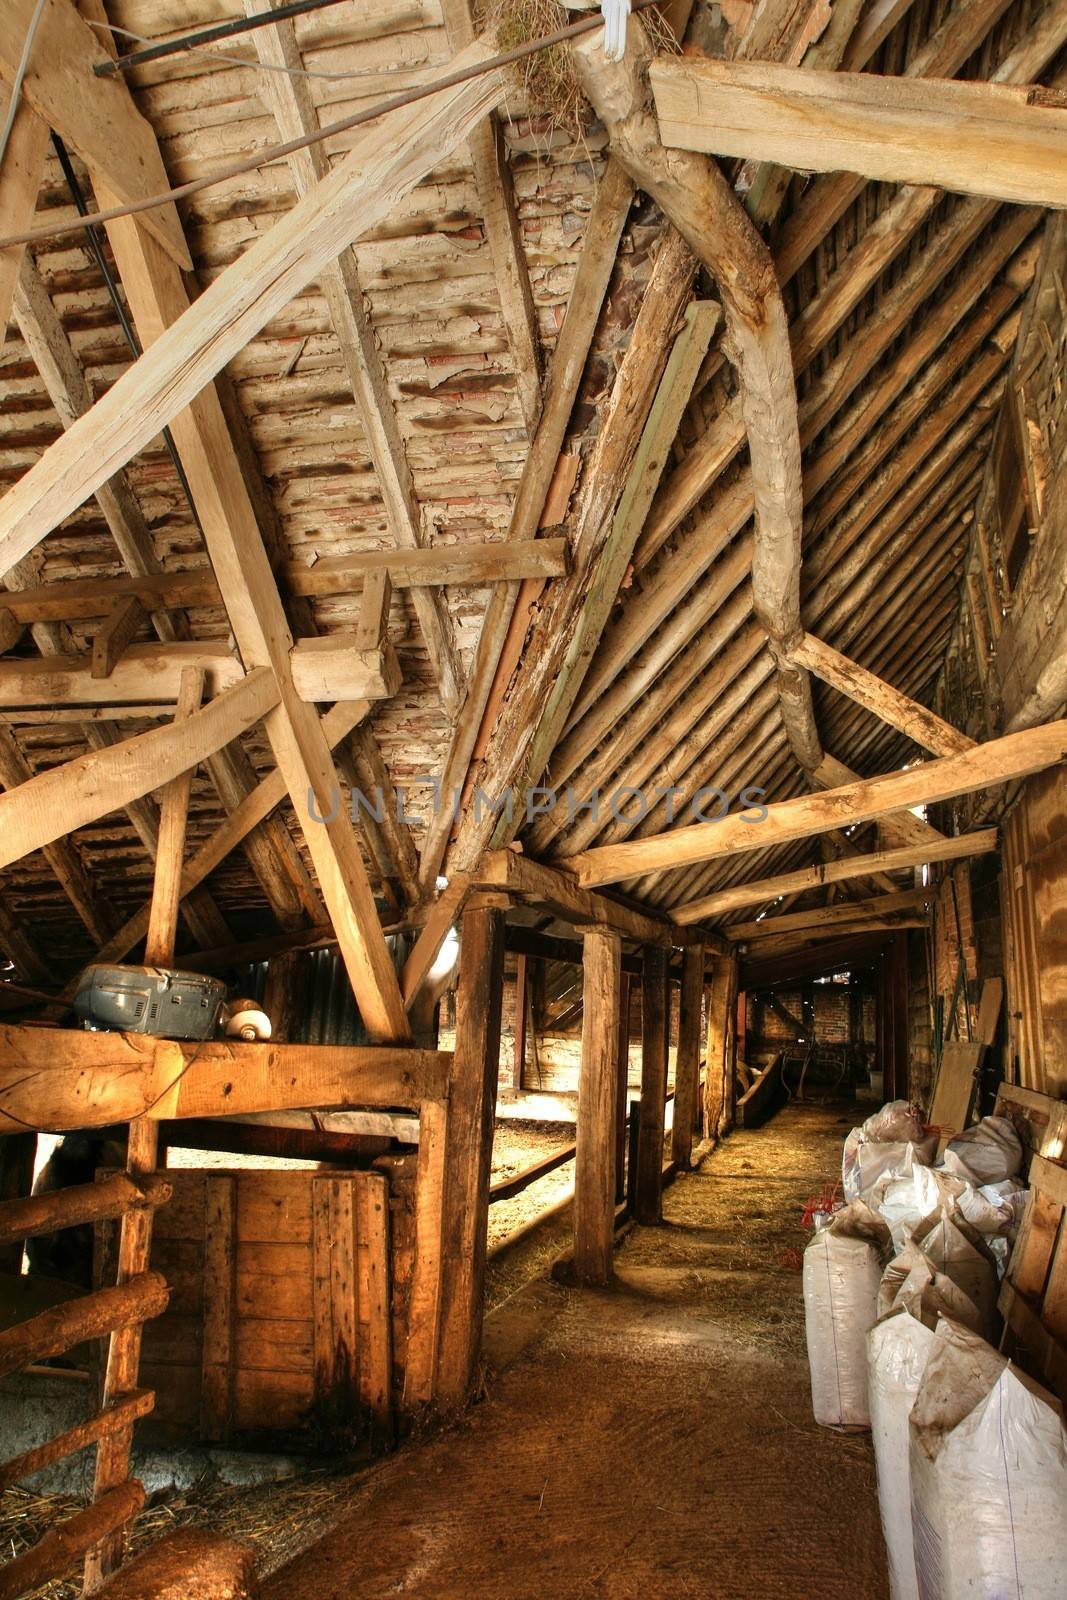 Traditional timber-framed barn, Worcestershire, England.